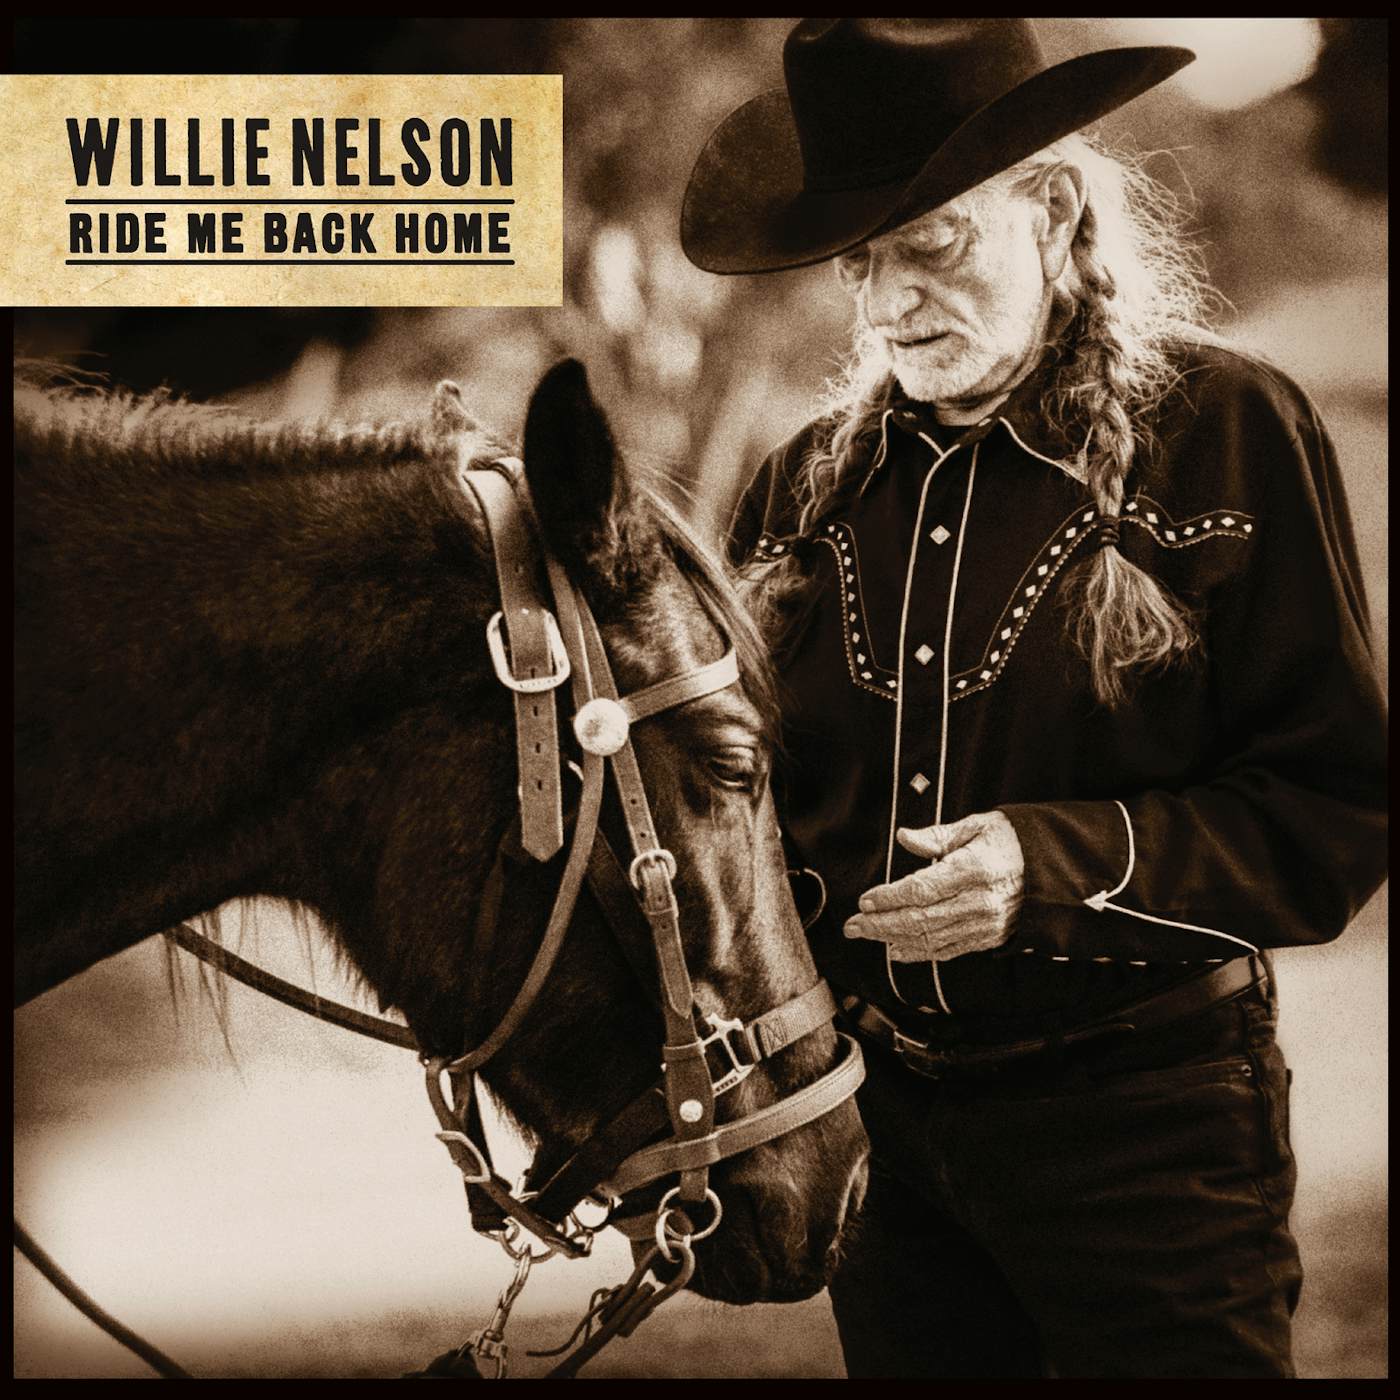 Willie Nelson Ride Me Back Home Vinyl Record